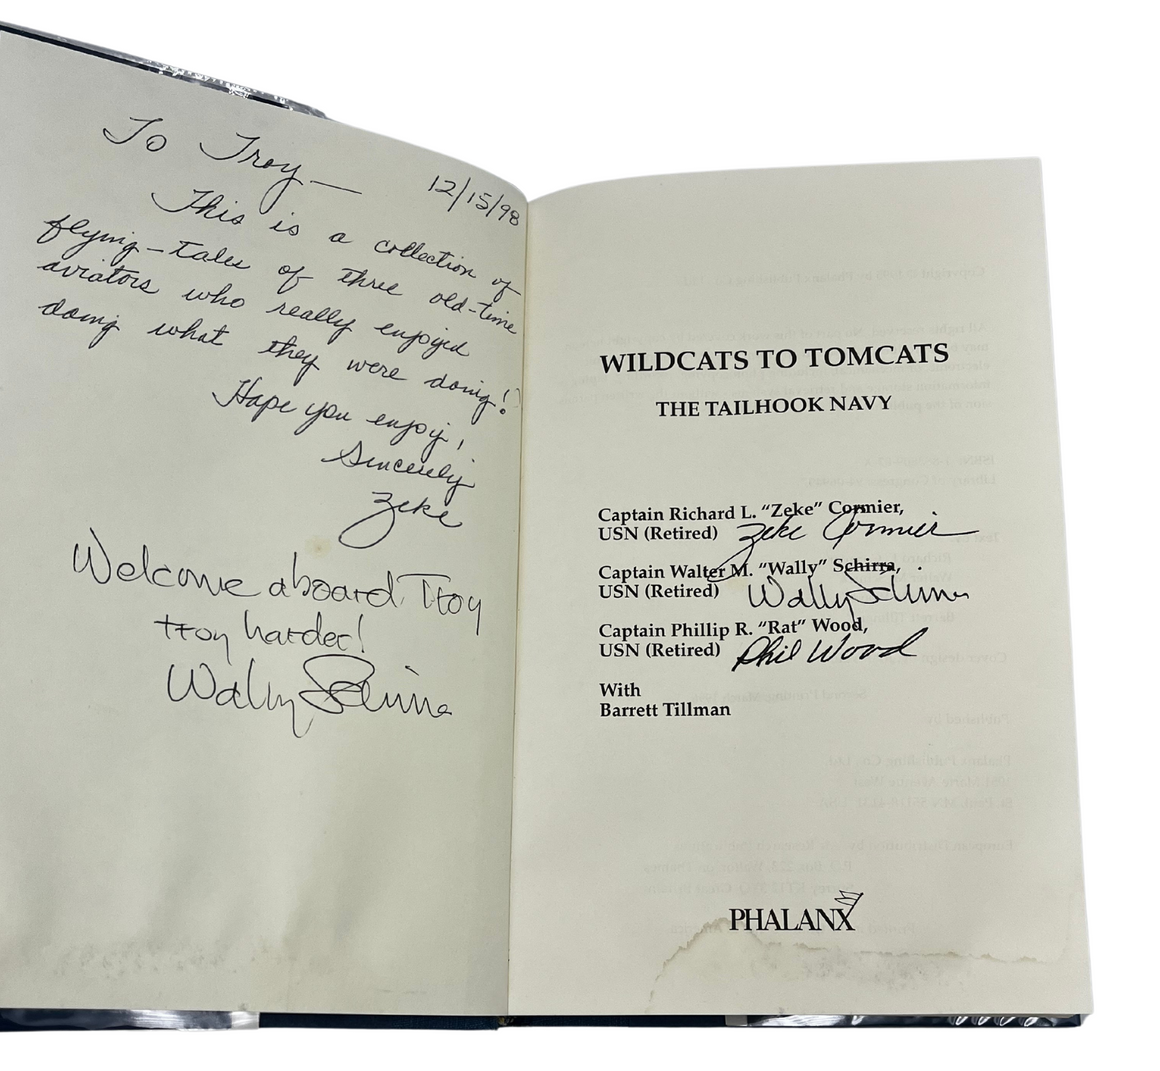 Wildcats to Tomcats: The Tailhook Navy, Signed by Richard Zeke Cormier, Wally Schirra, and Phil Wood, Inscribed by Cormier and Schirra, Second Printing, 1996